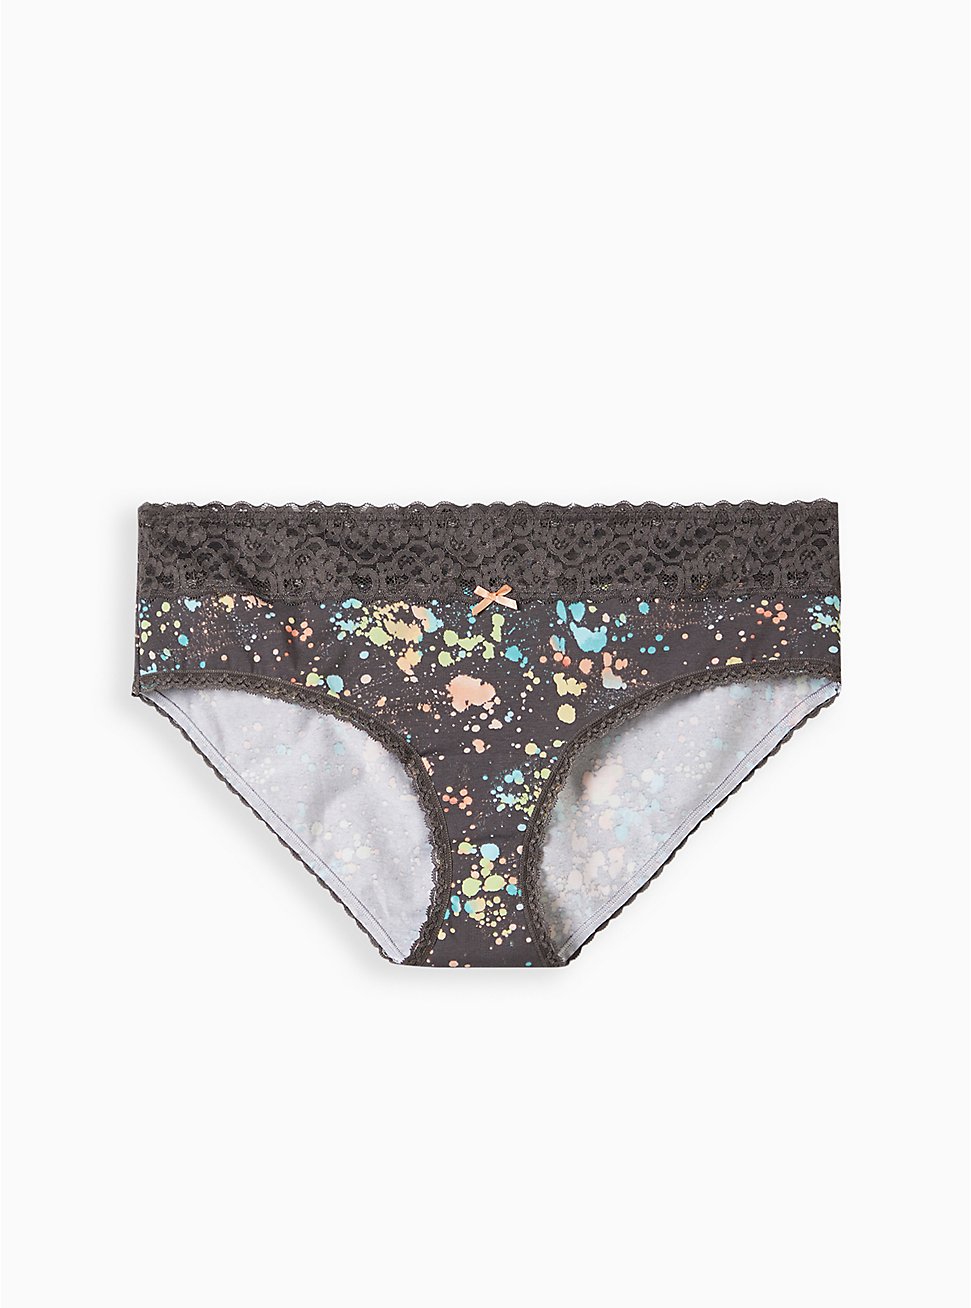 Cotton Mid-Rise Hipster Lace Trim Panty, PAINTERLY SPLATTER GREY, hi-res